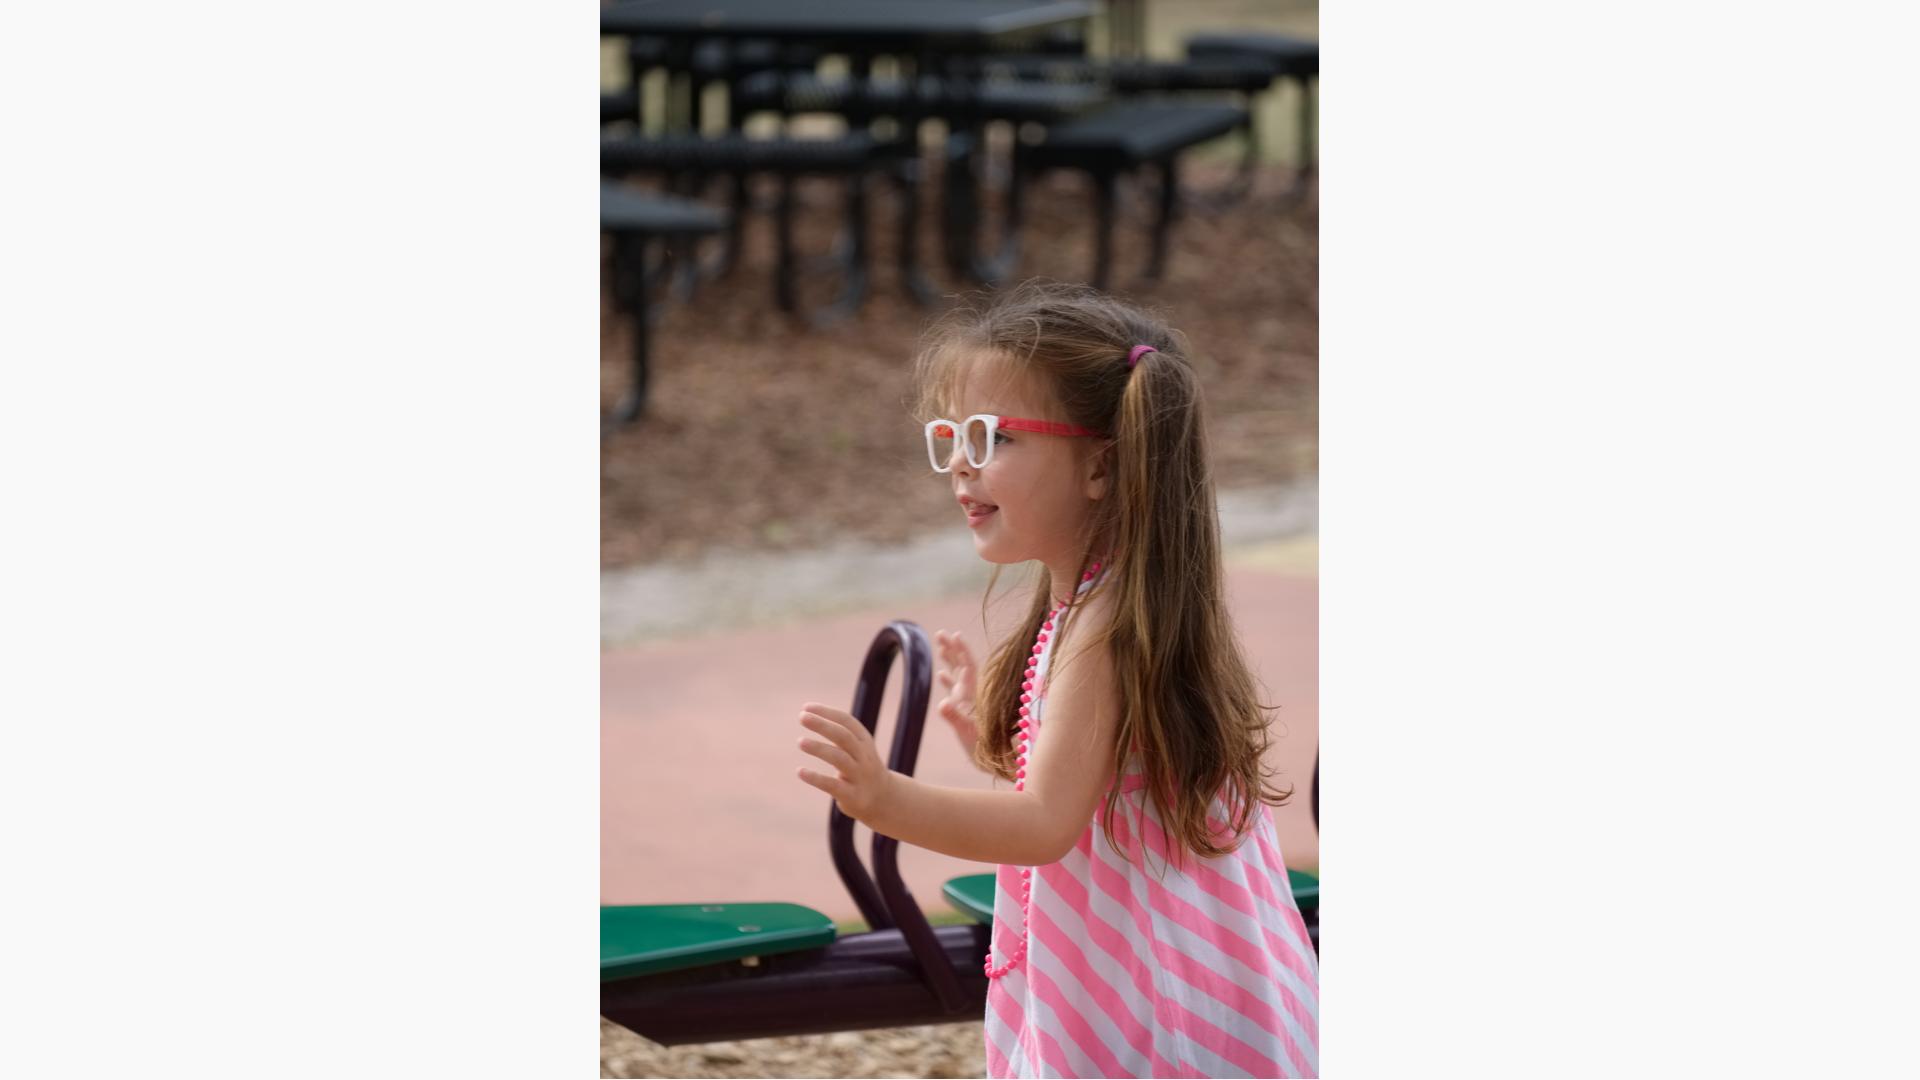 Girl wearing pink stripe dress and glasses stands next to see-saw